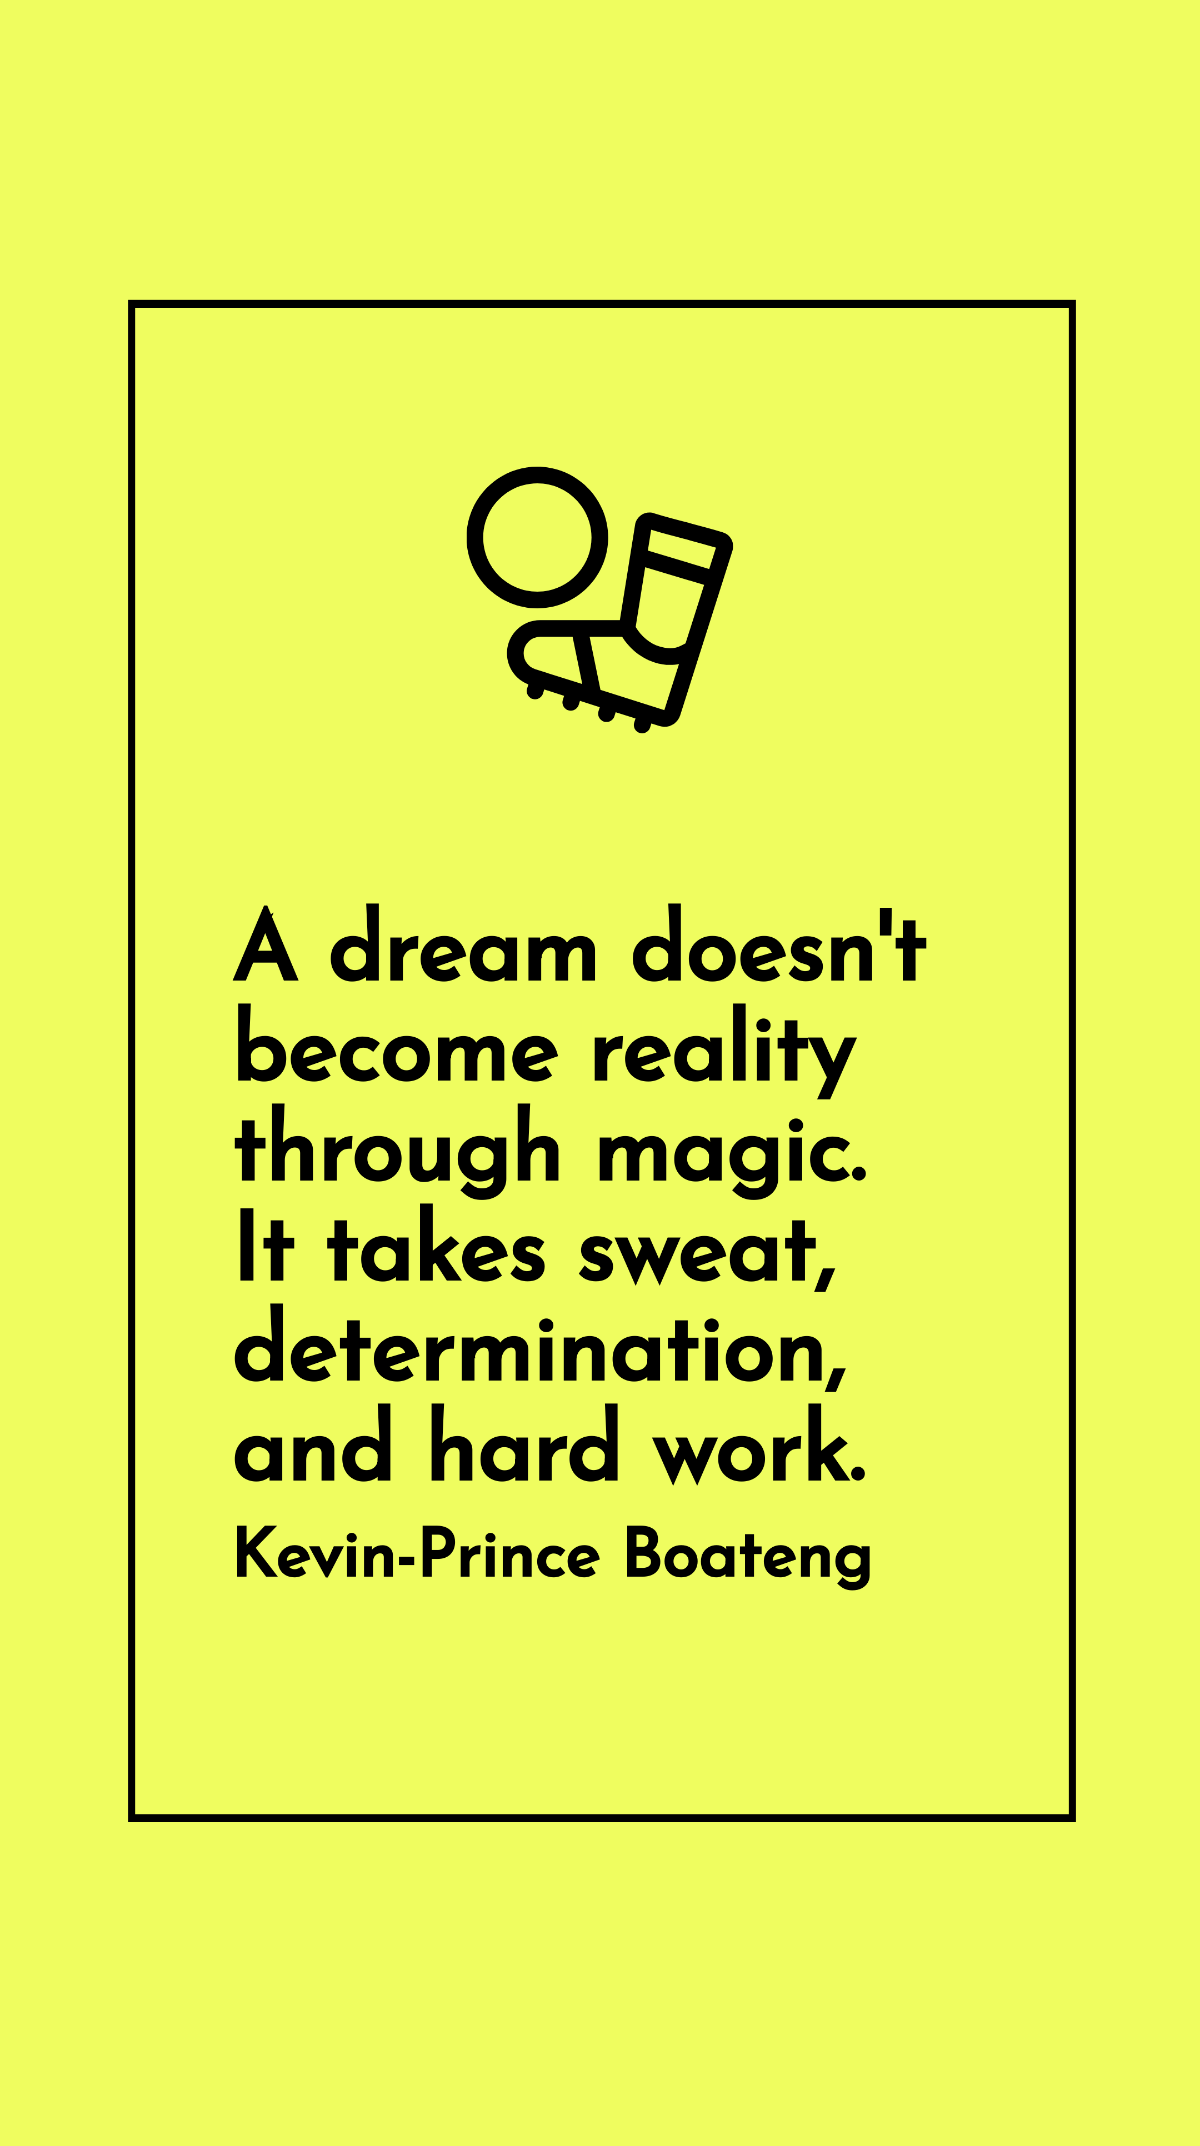 Kevin-Prince Boateng - A dream doesn't become reality through magic. It takes sweat, determination, and hard work.